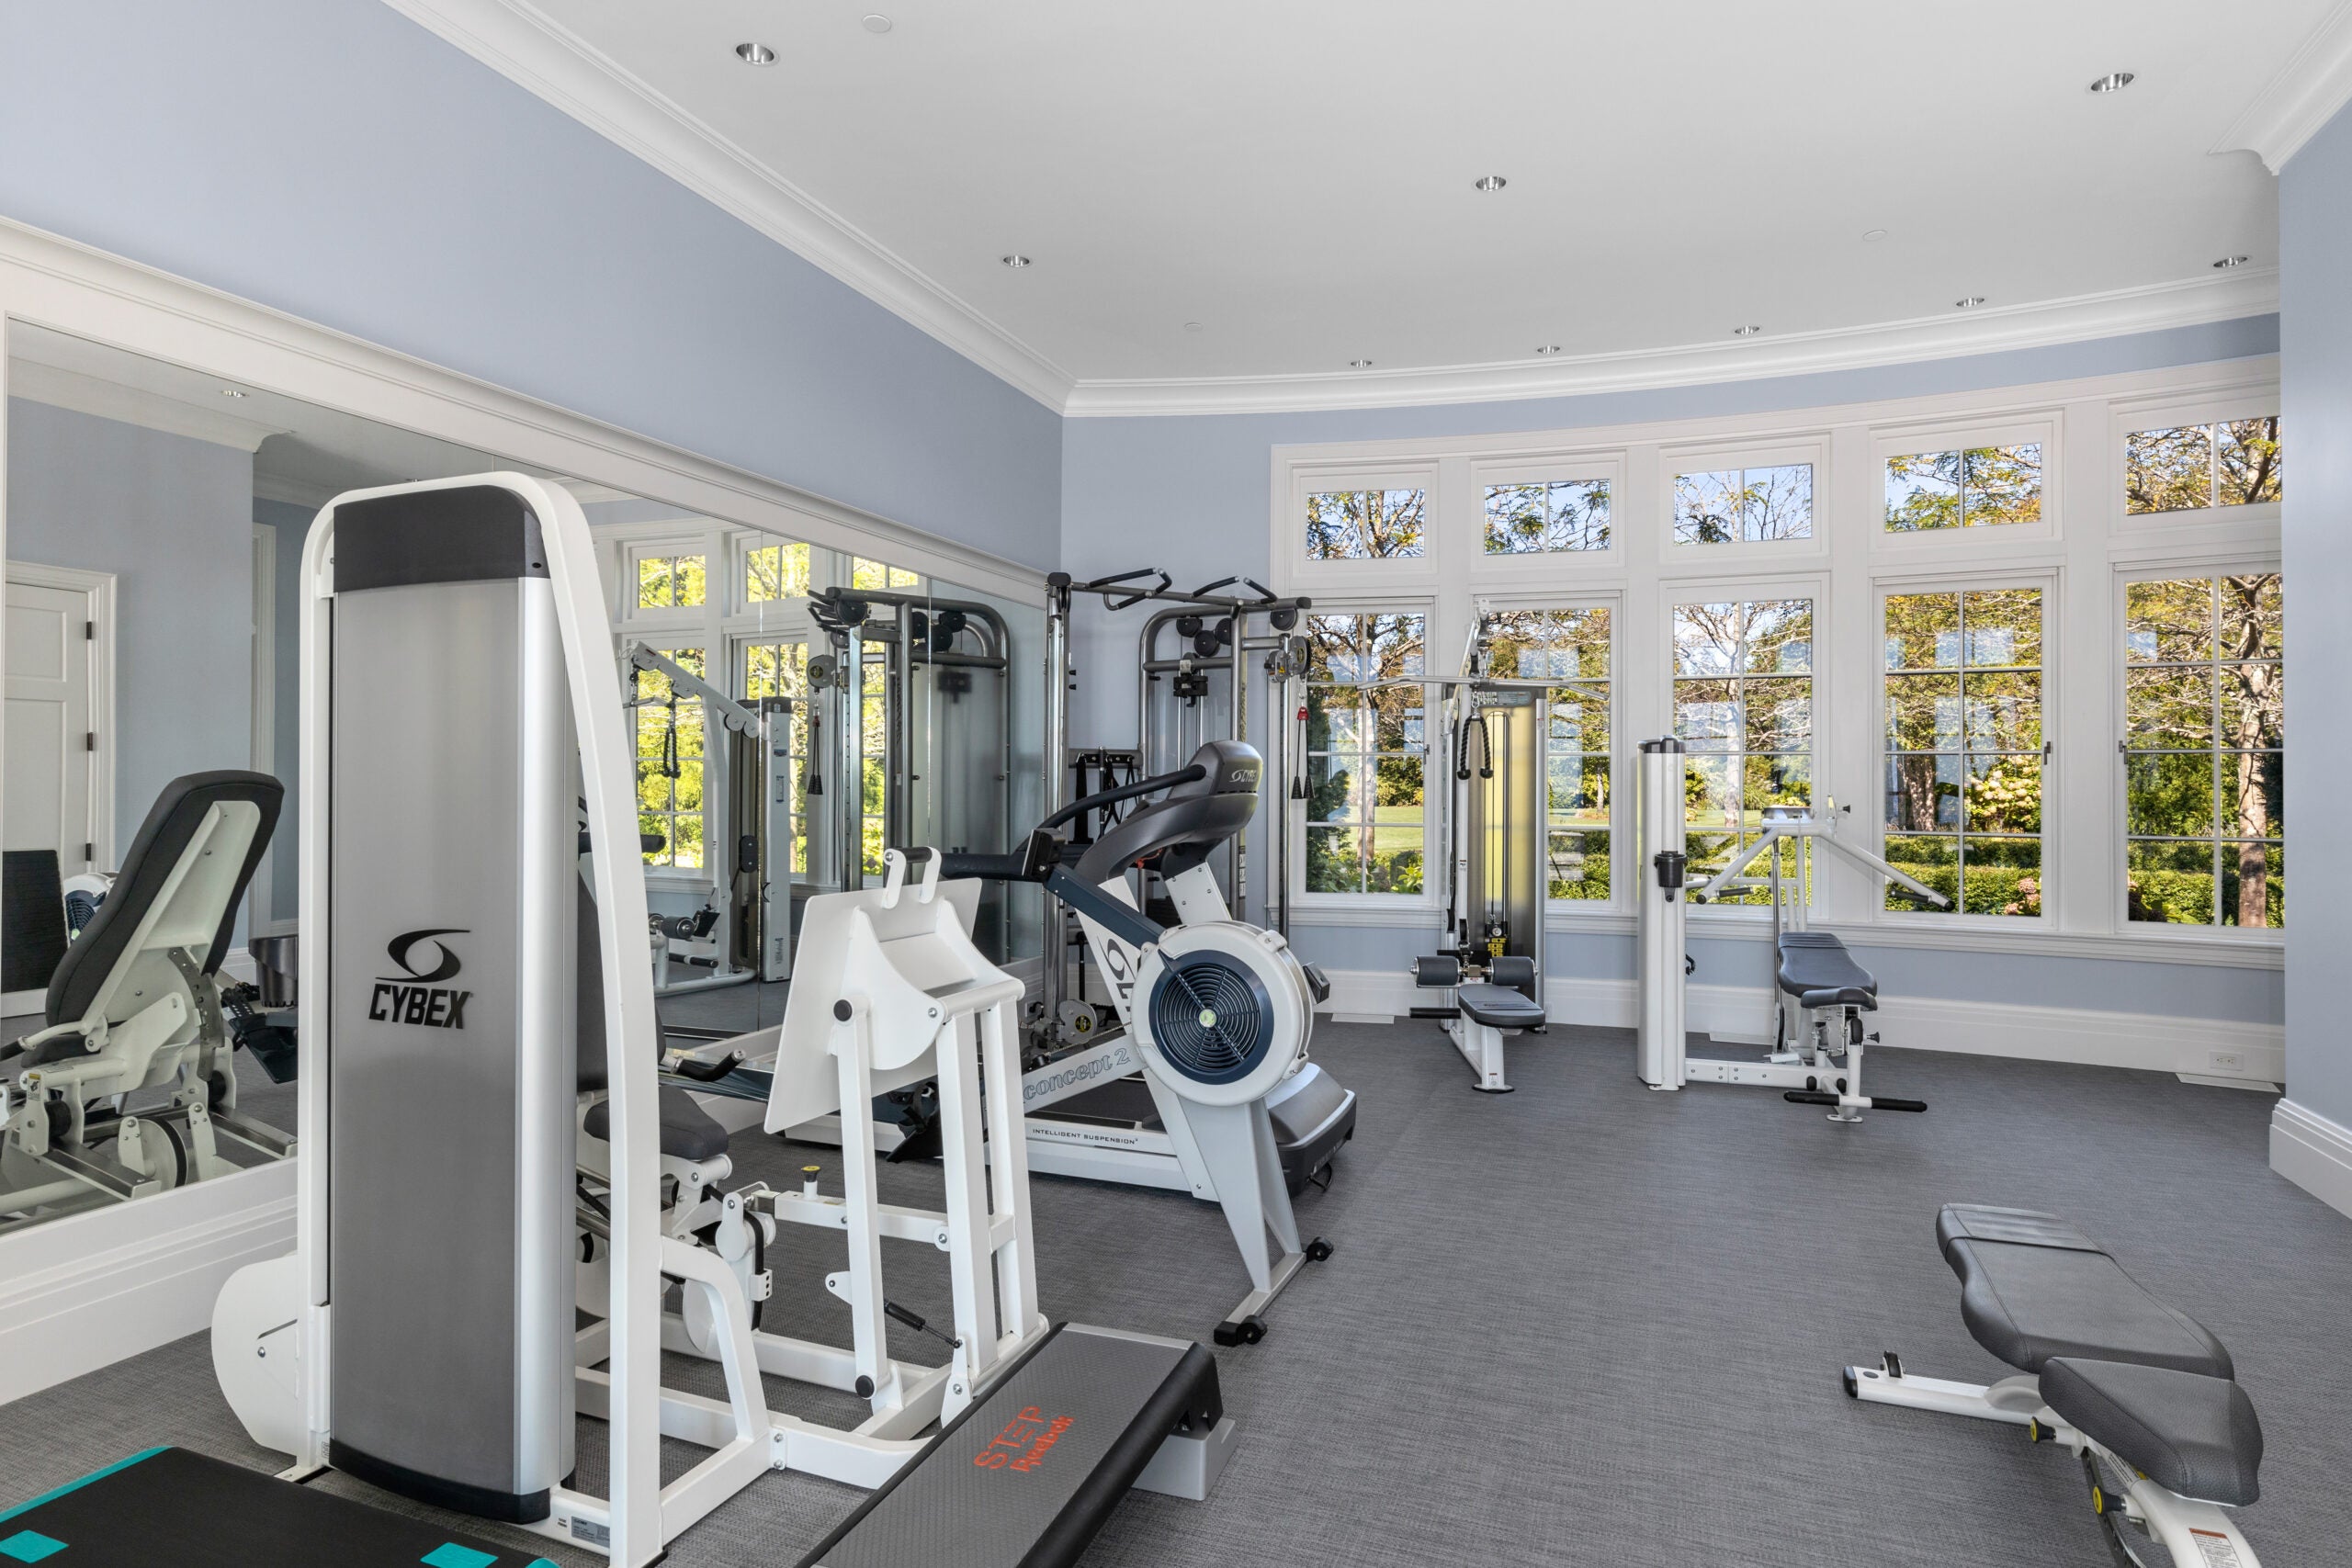 A carpeted gym with recessed lighting. A banks of myriad windows is in the background, offering a view of a wooded expanse. The space is mirrored and full of gym equipment. The walls are a light blue.